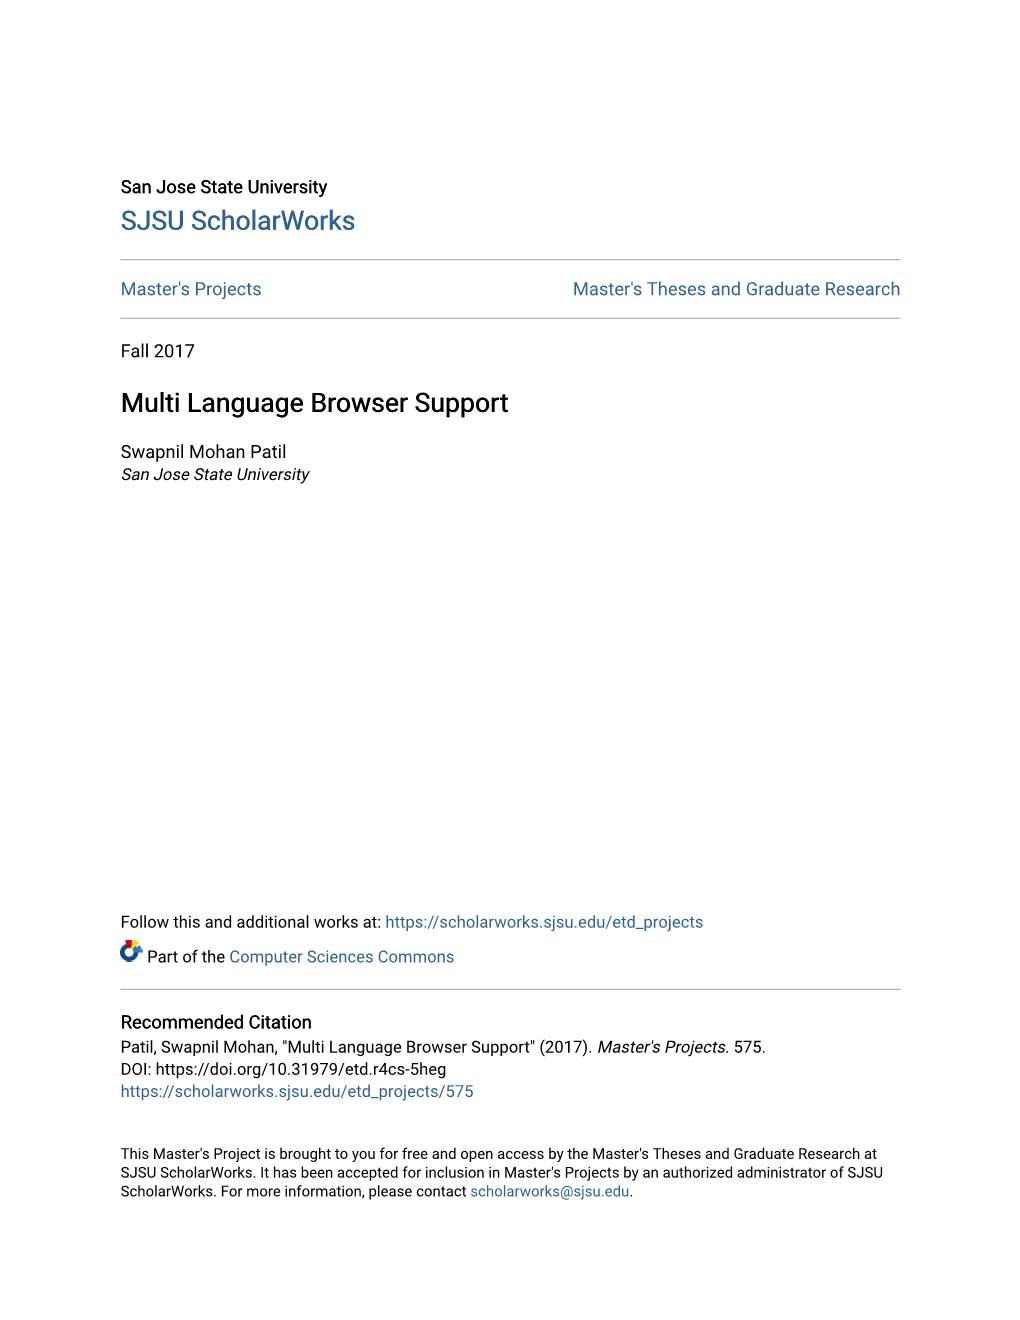 Multi Language Browser Support